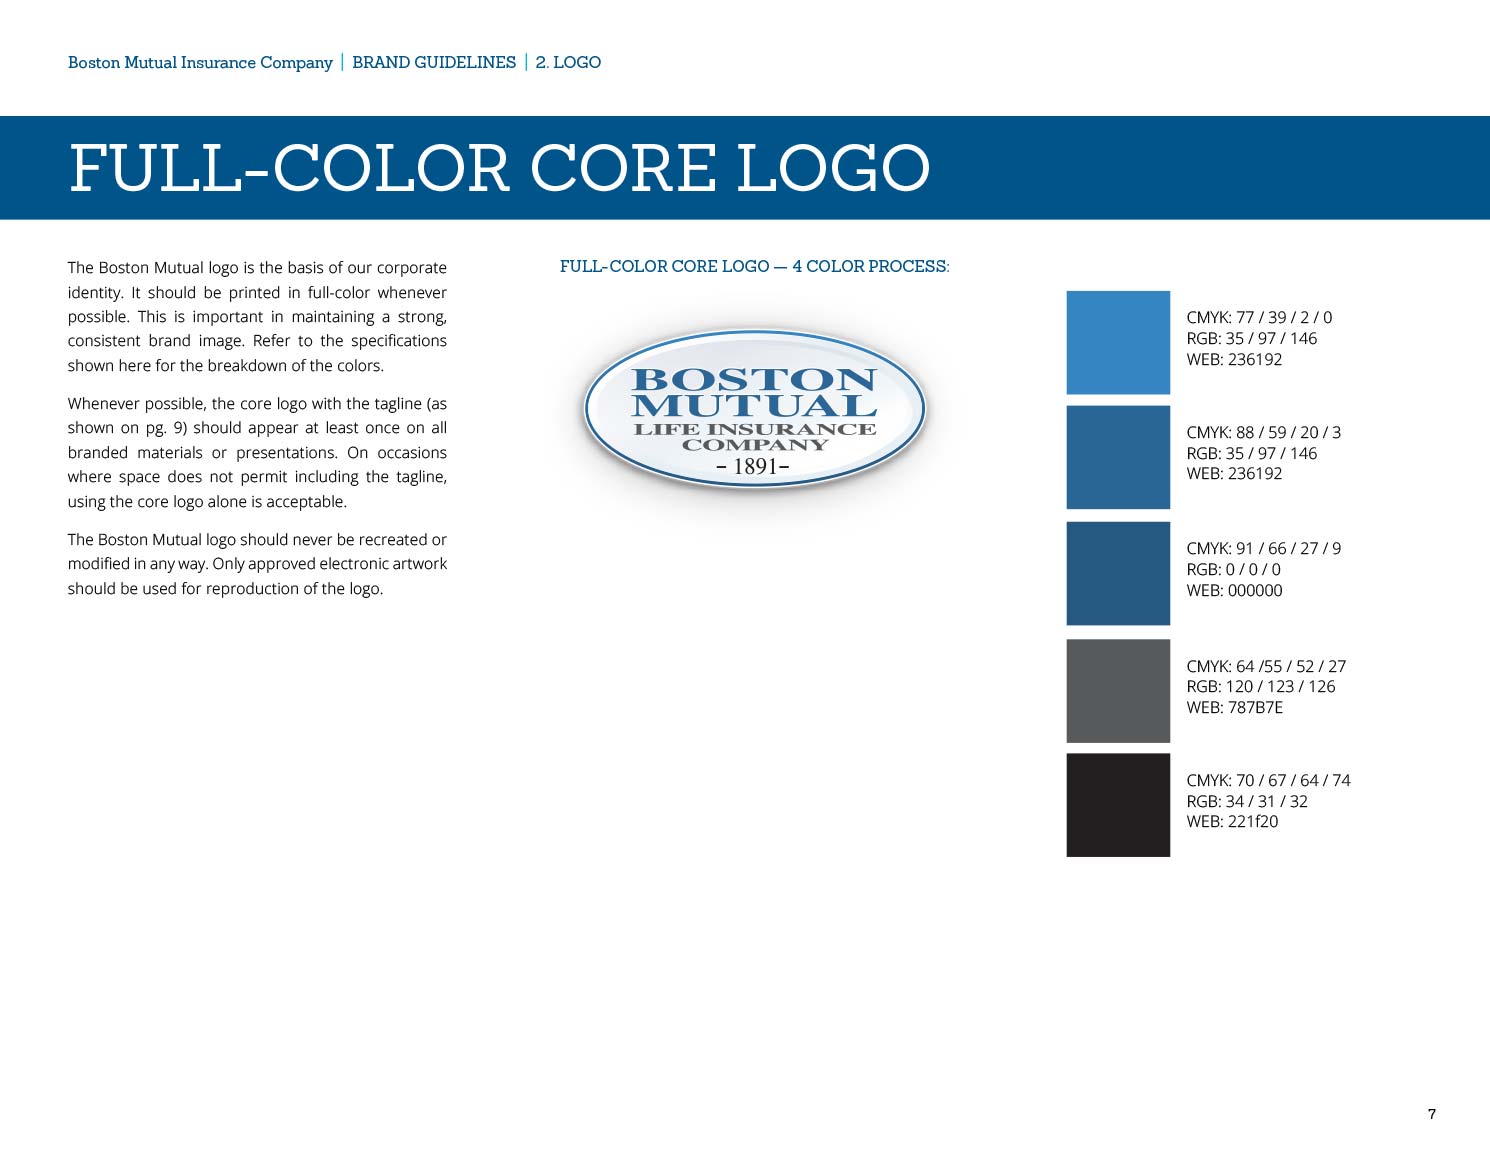 boston mutual brand guide page showing full-color logo